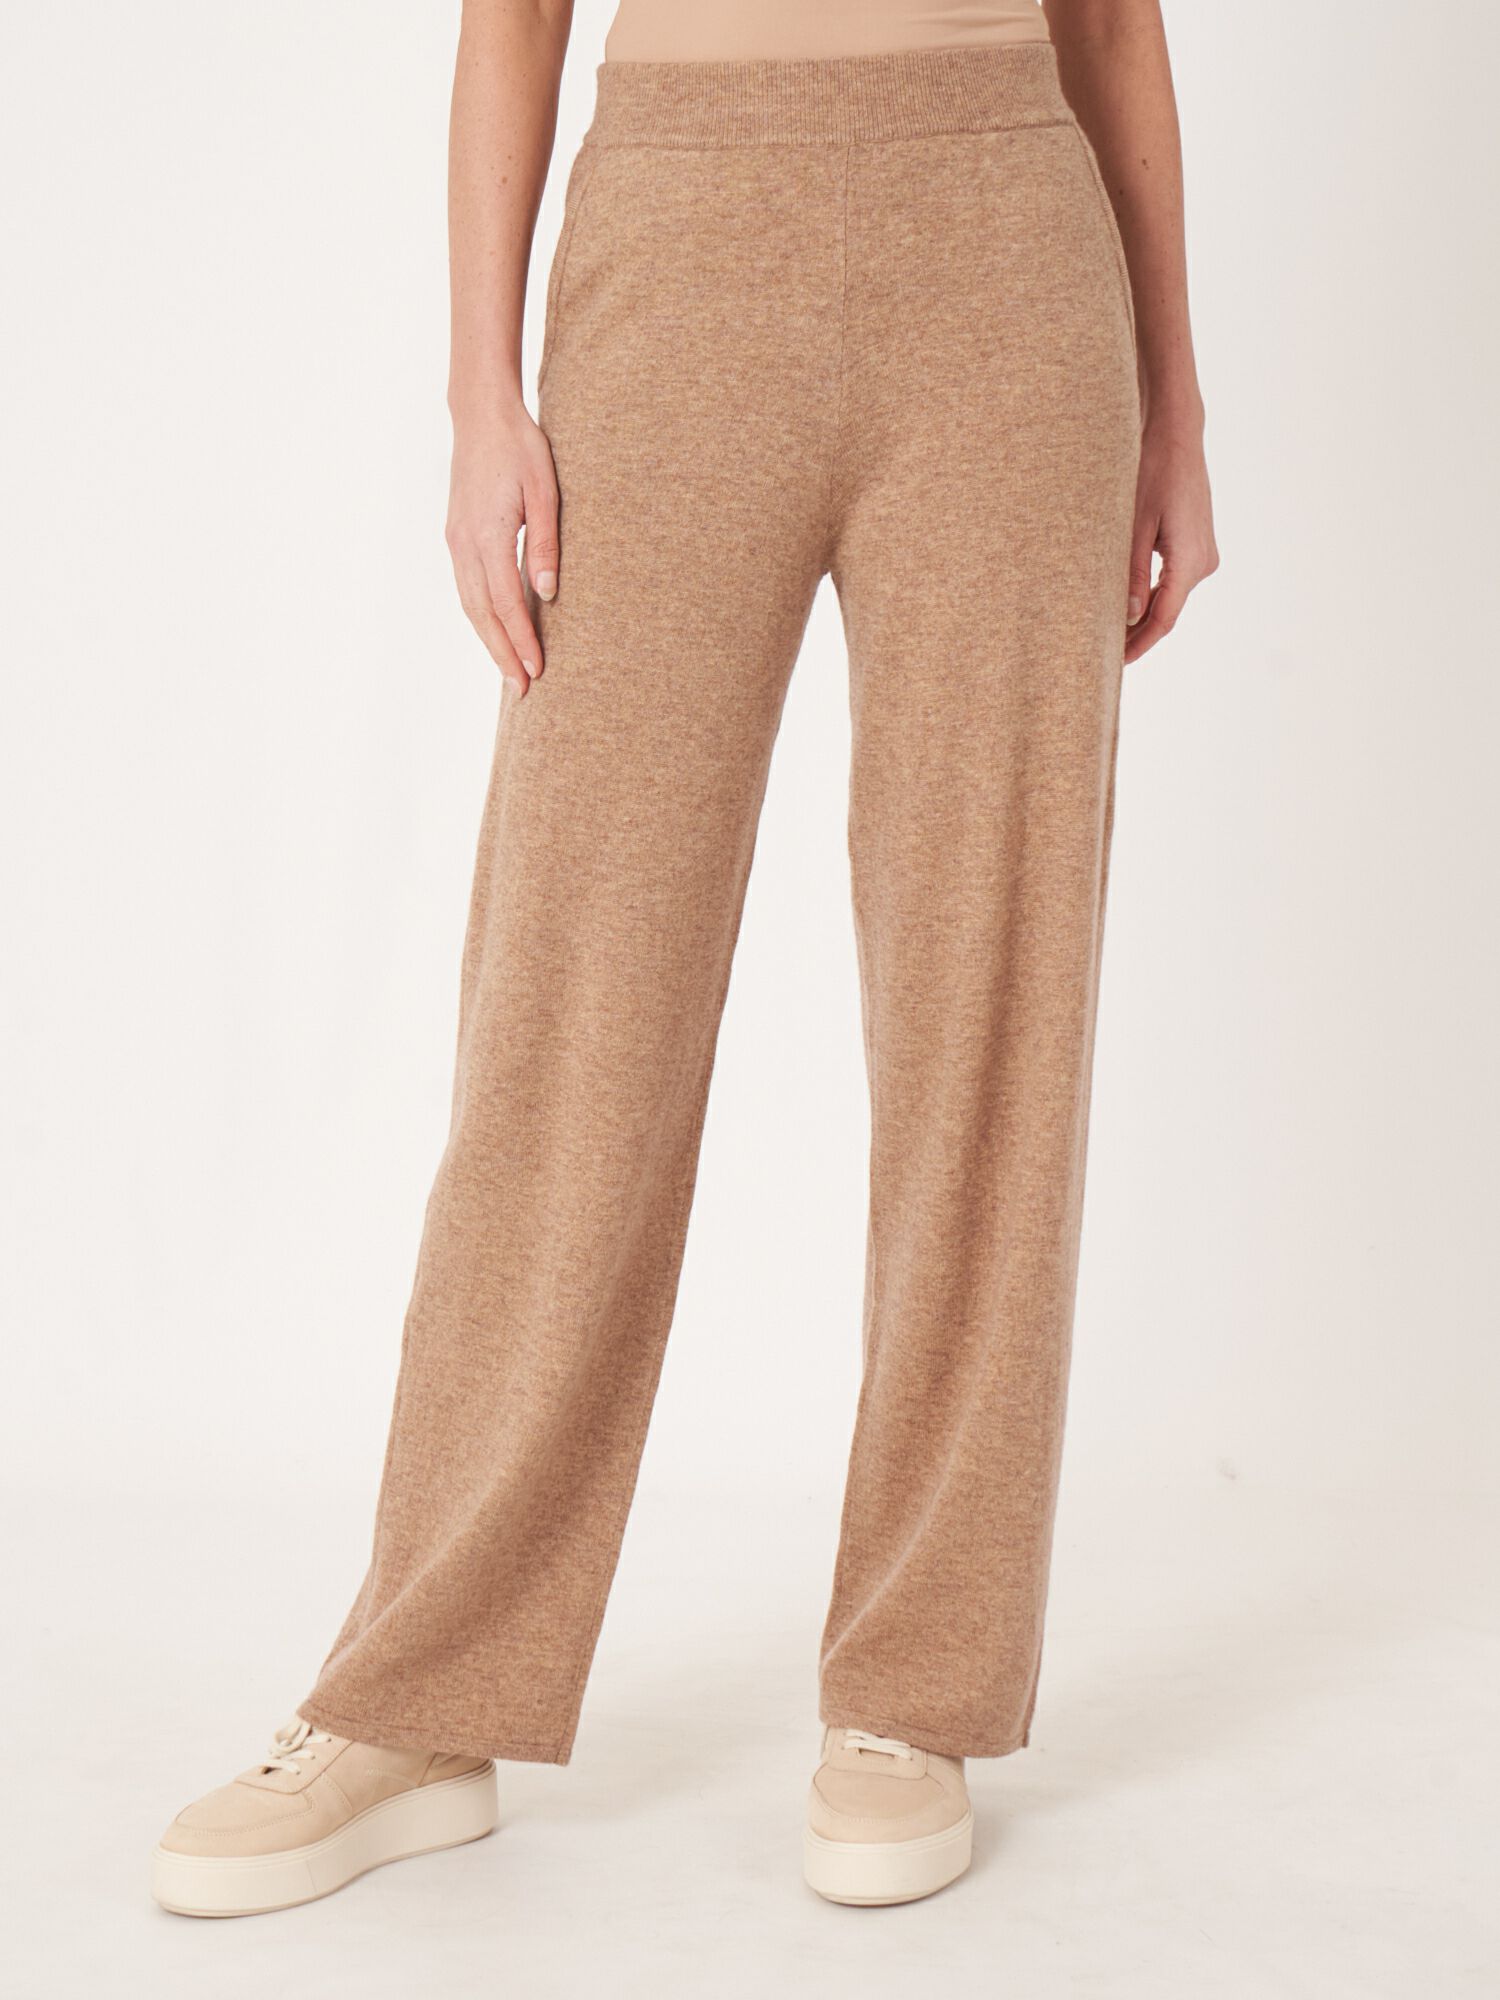 Burberry Wool Cashmere Tweed Tailored Trousers With Belt Detail, Brand Size  8 (US Size 6) - Walmart.com